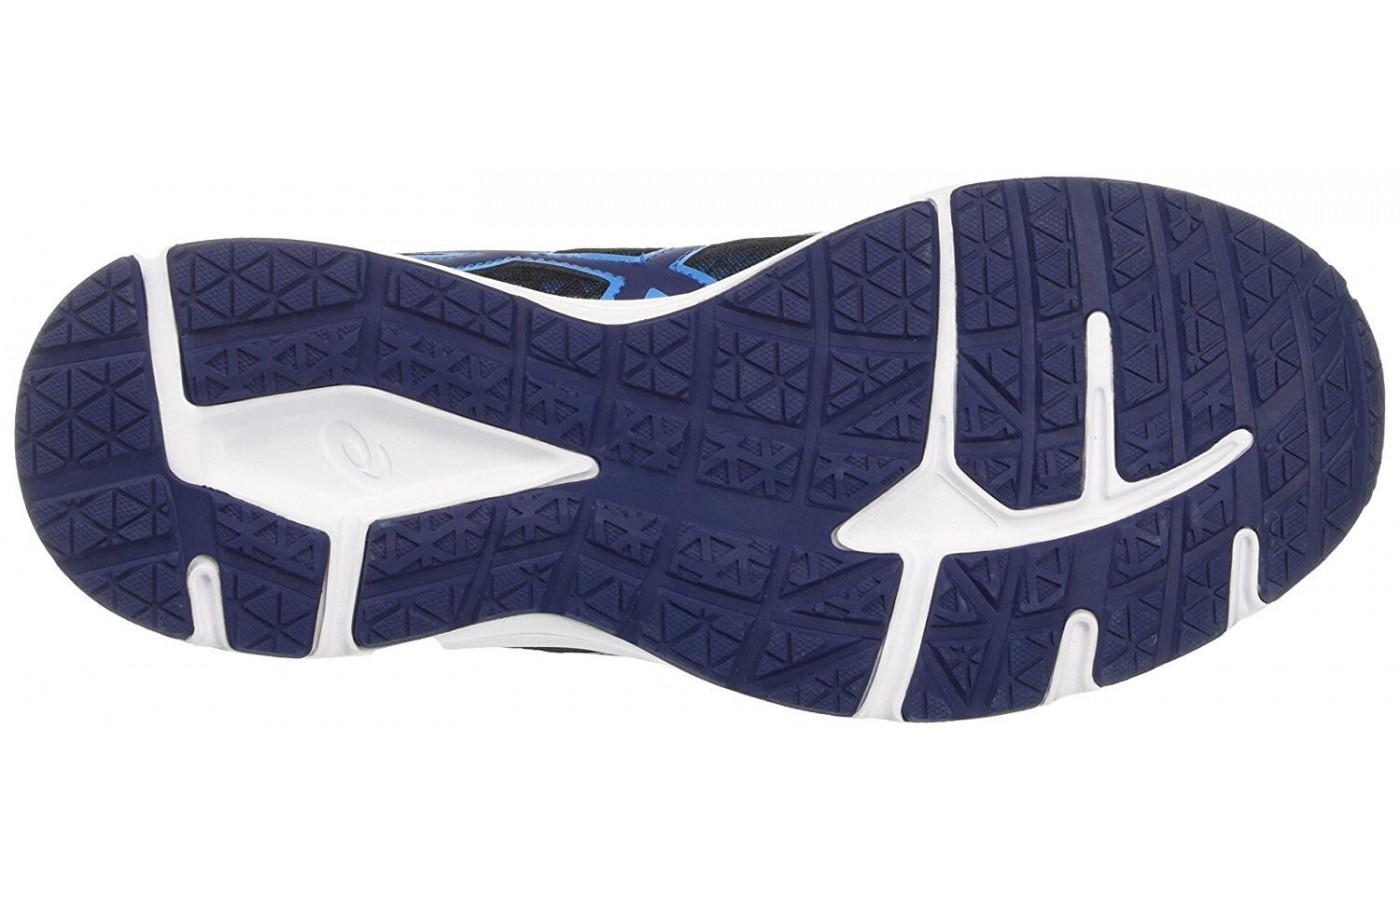 the outsole of the ASICCS Patriot 8 has good traction